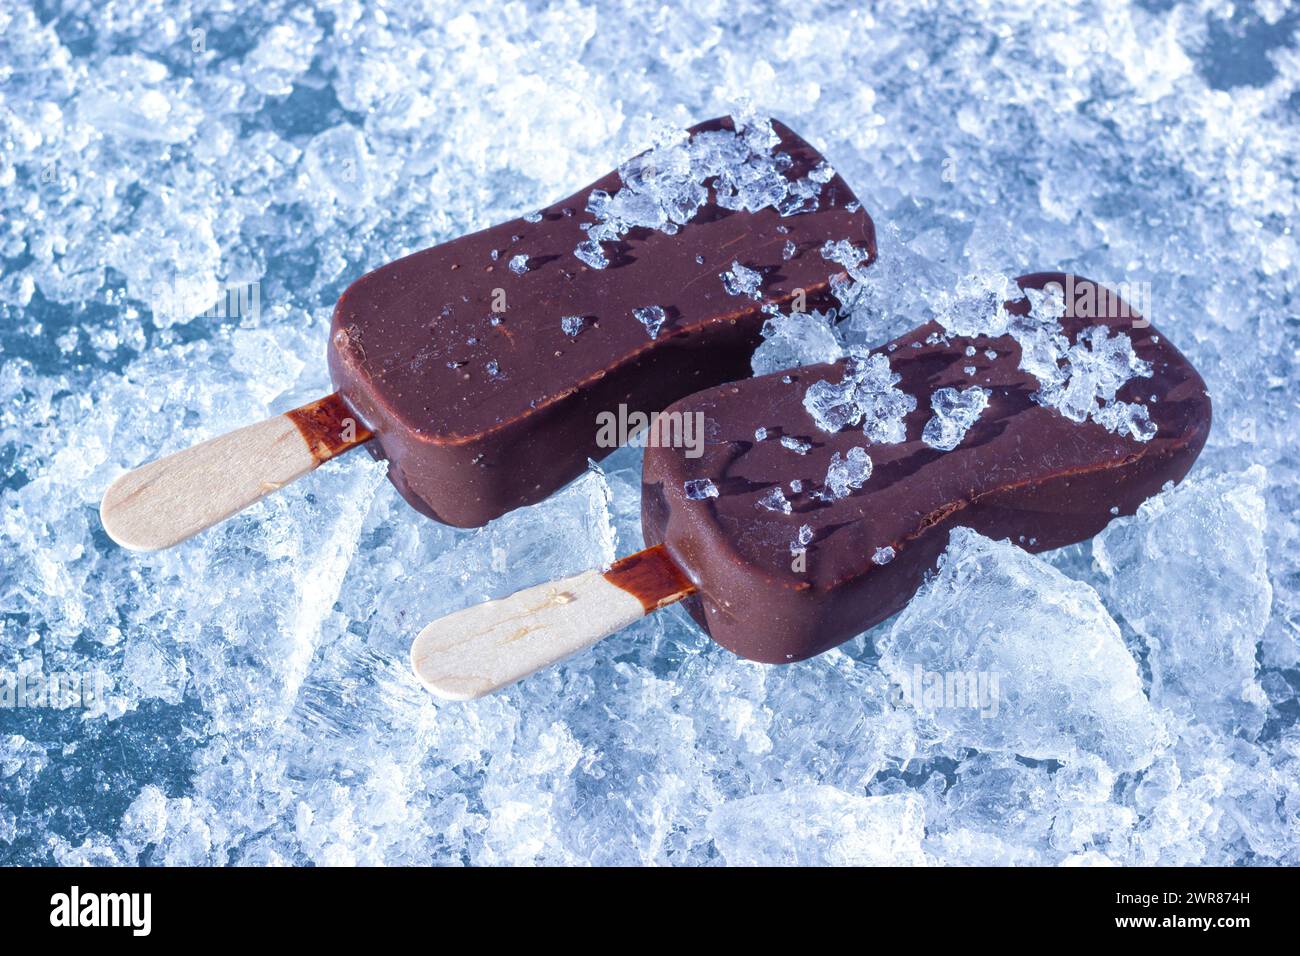 The Chocolate Coated Ice Cream Bars On Wooden Stick On The Chopped Ice Crystals. Stock Photo